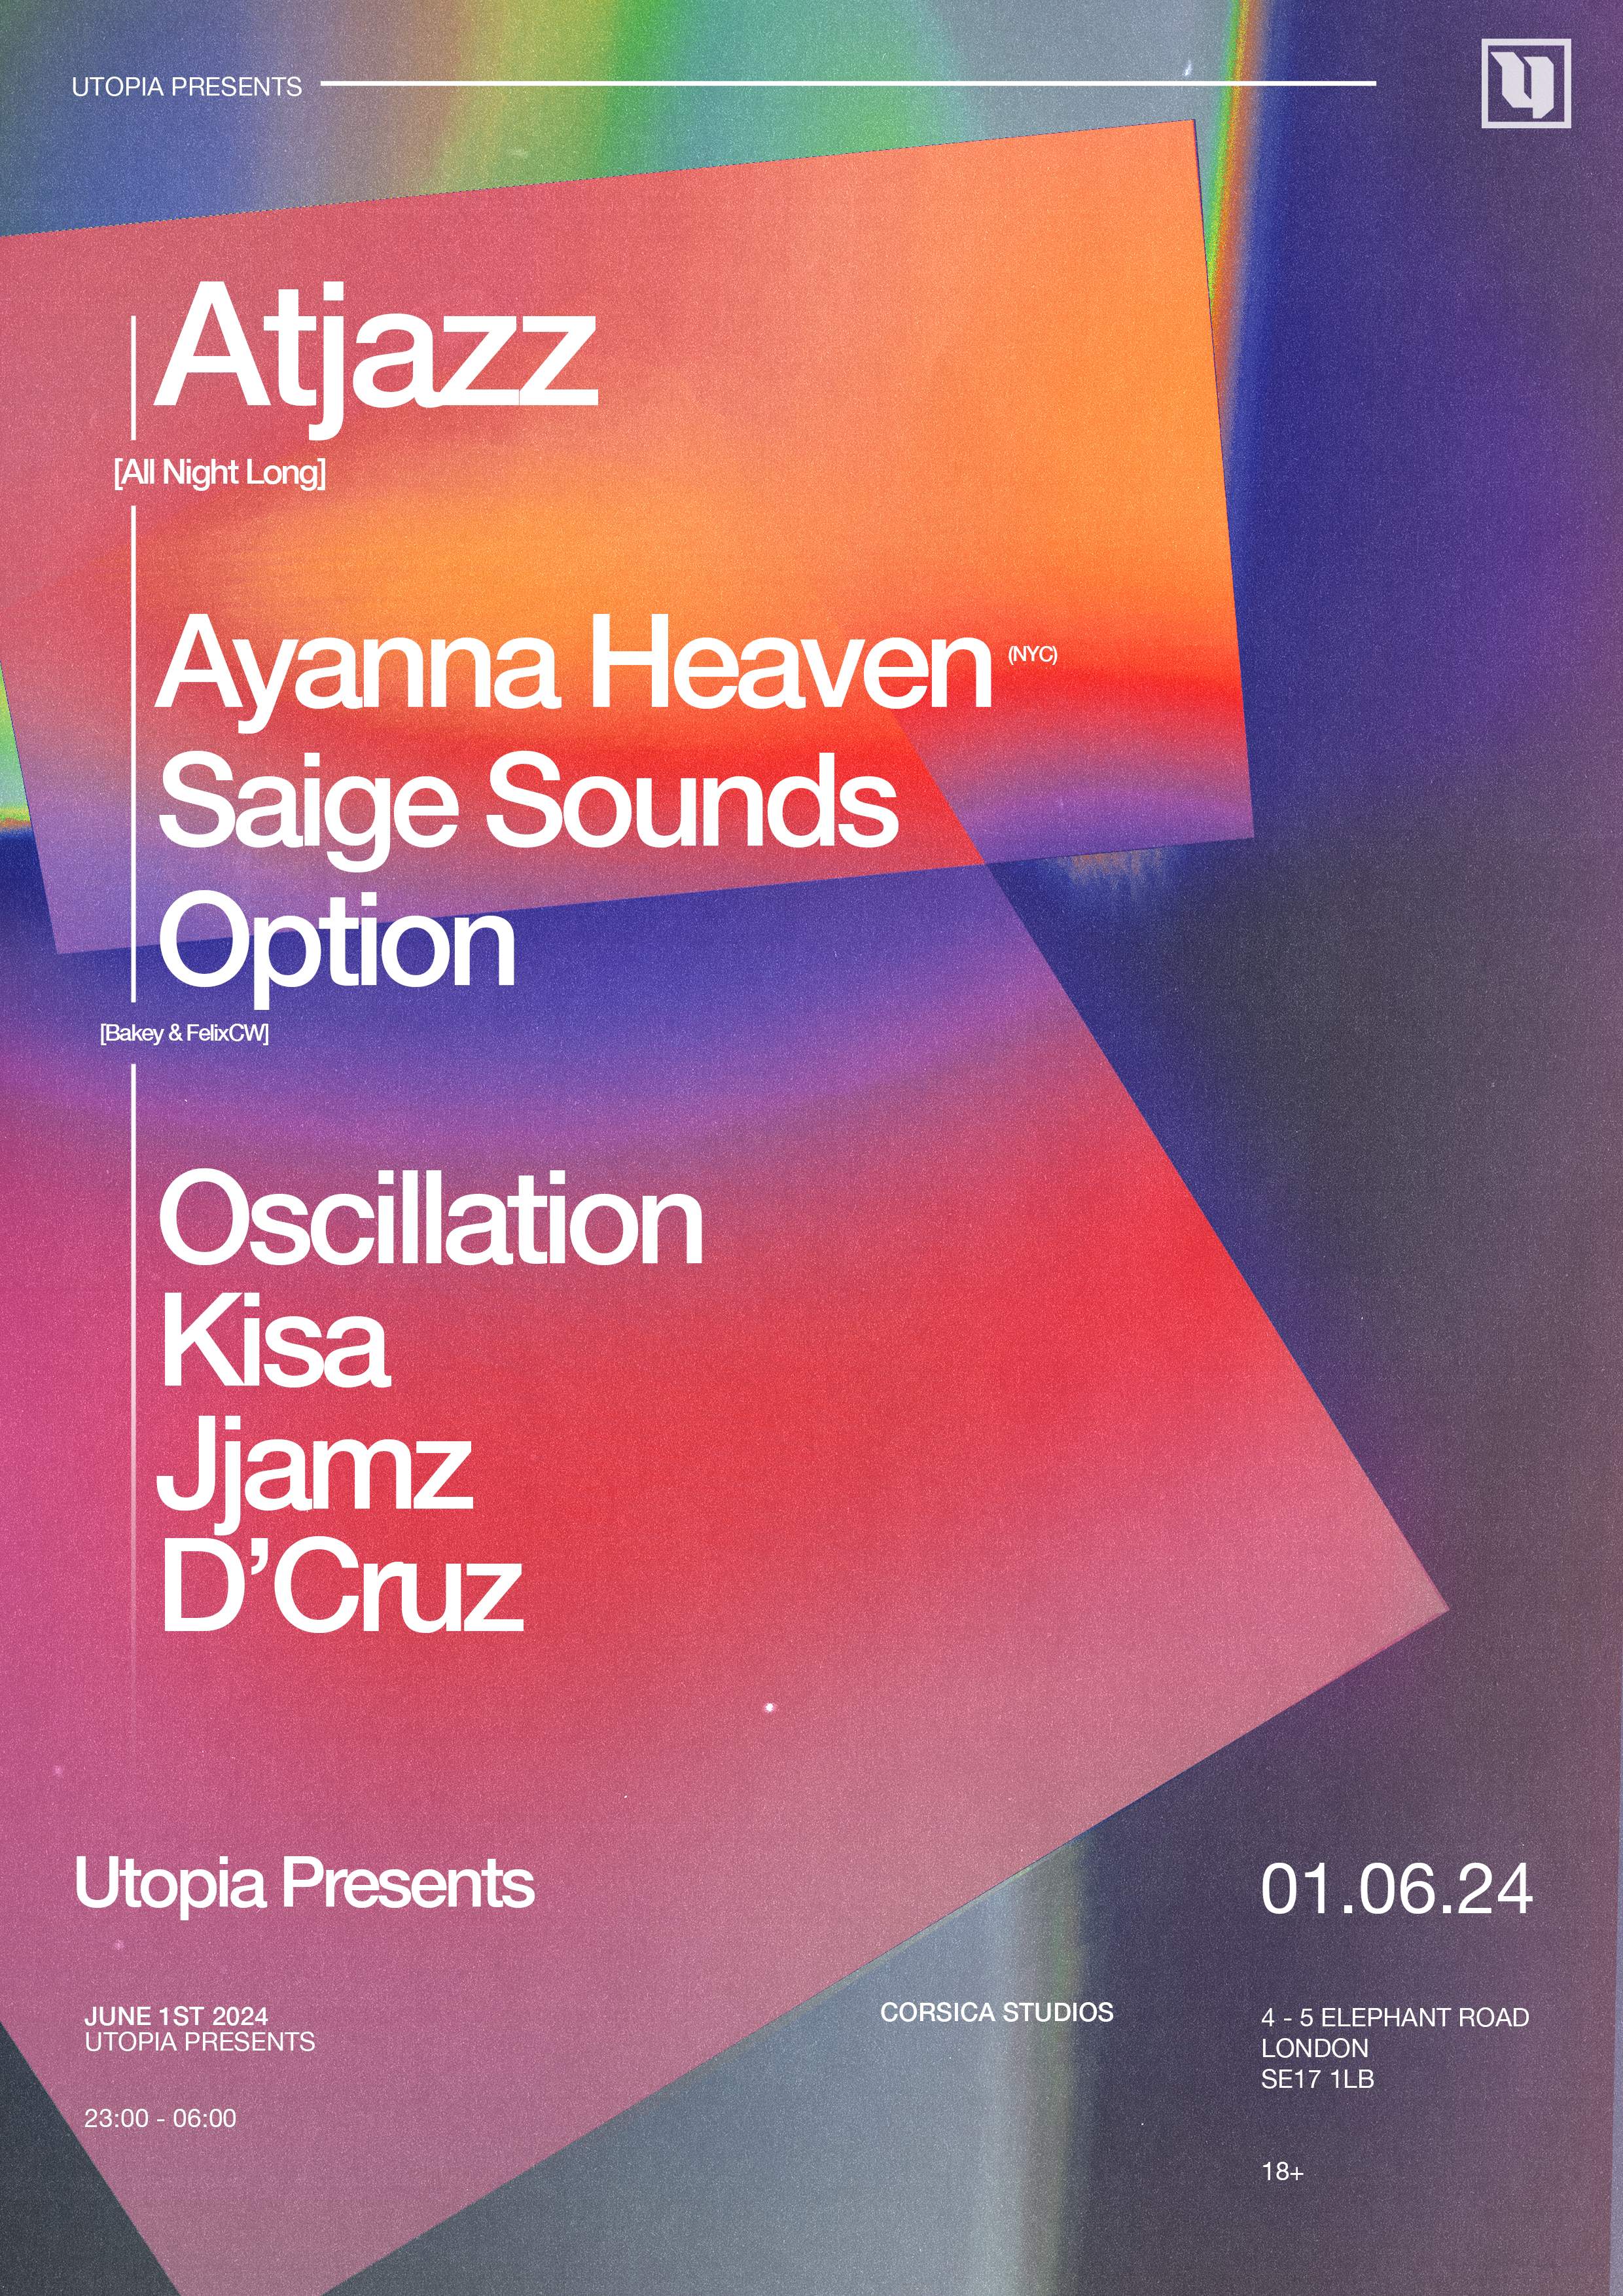 Utopia: Atjazz [All Night Long], Ayanna Heaven (NYC), Saige Sounds, Option + more - フライヤー表